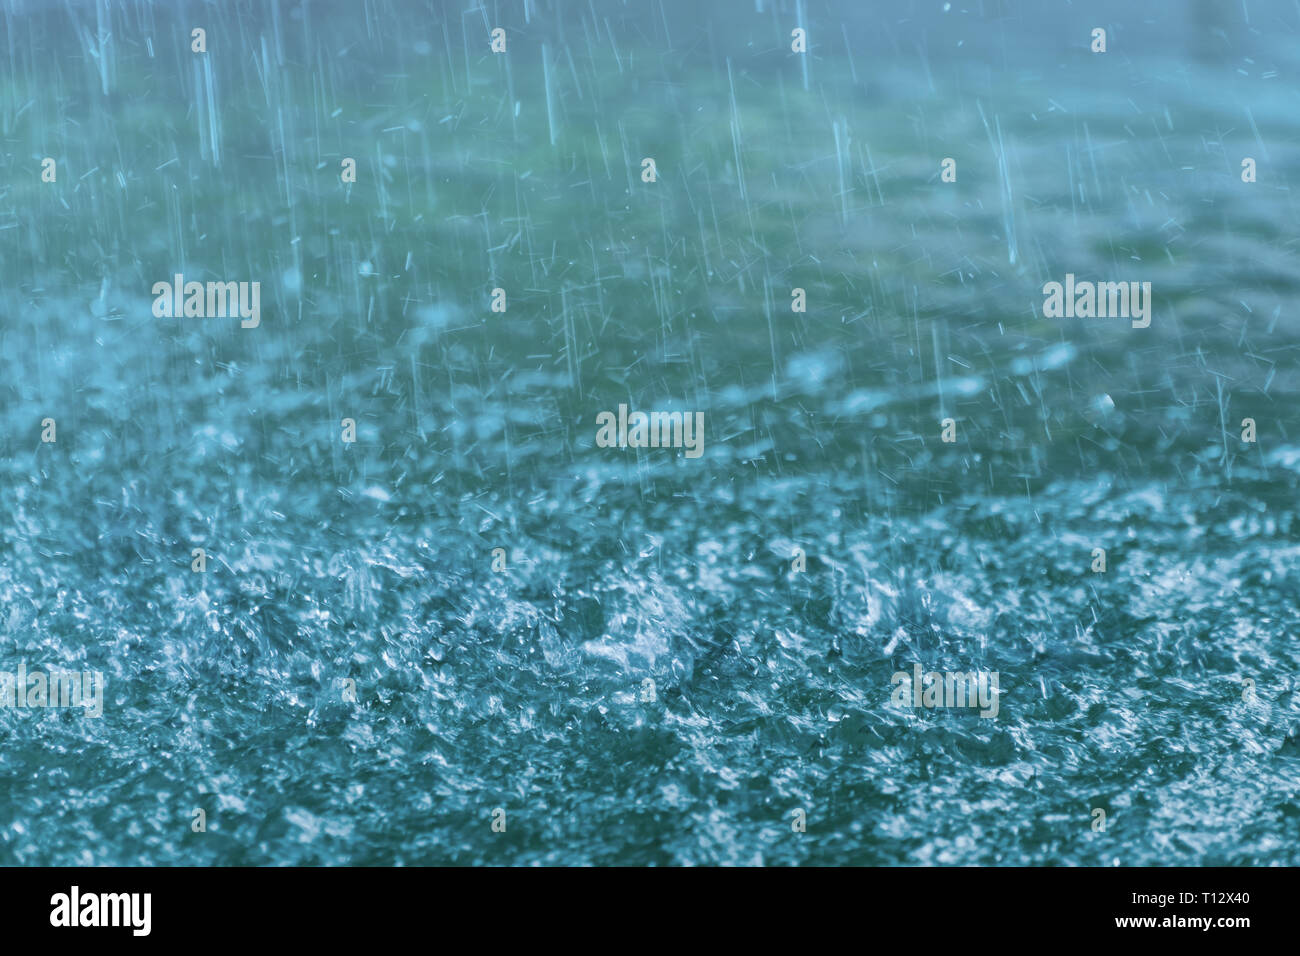 Droplets hitting water surface. Raindrops falling on the blue surface of water.  Motion blur. Stock Photo